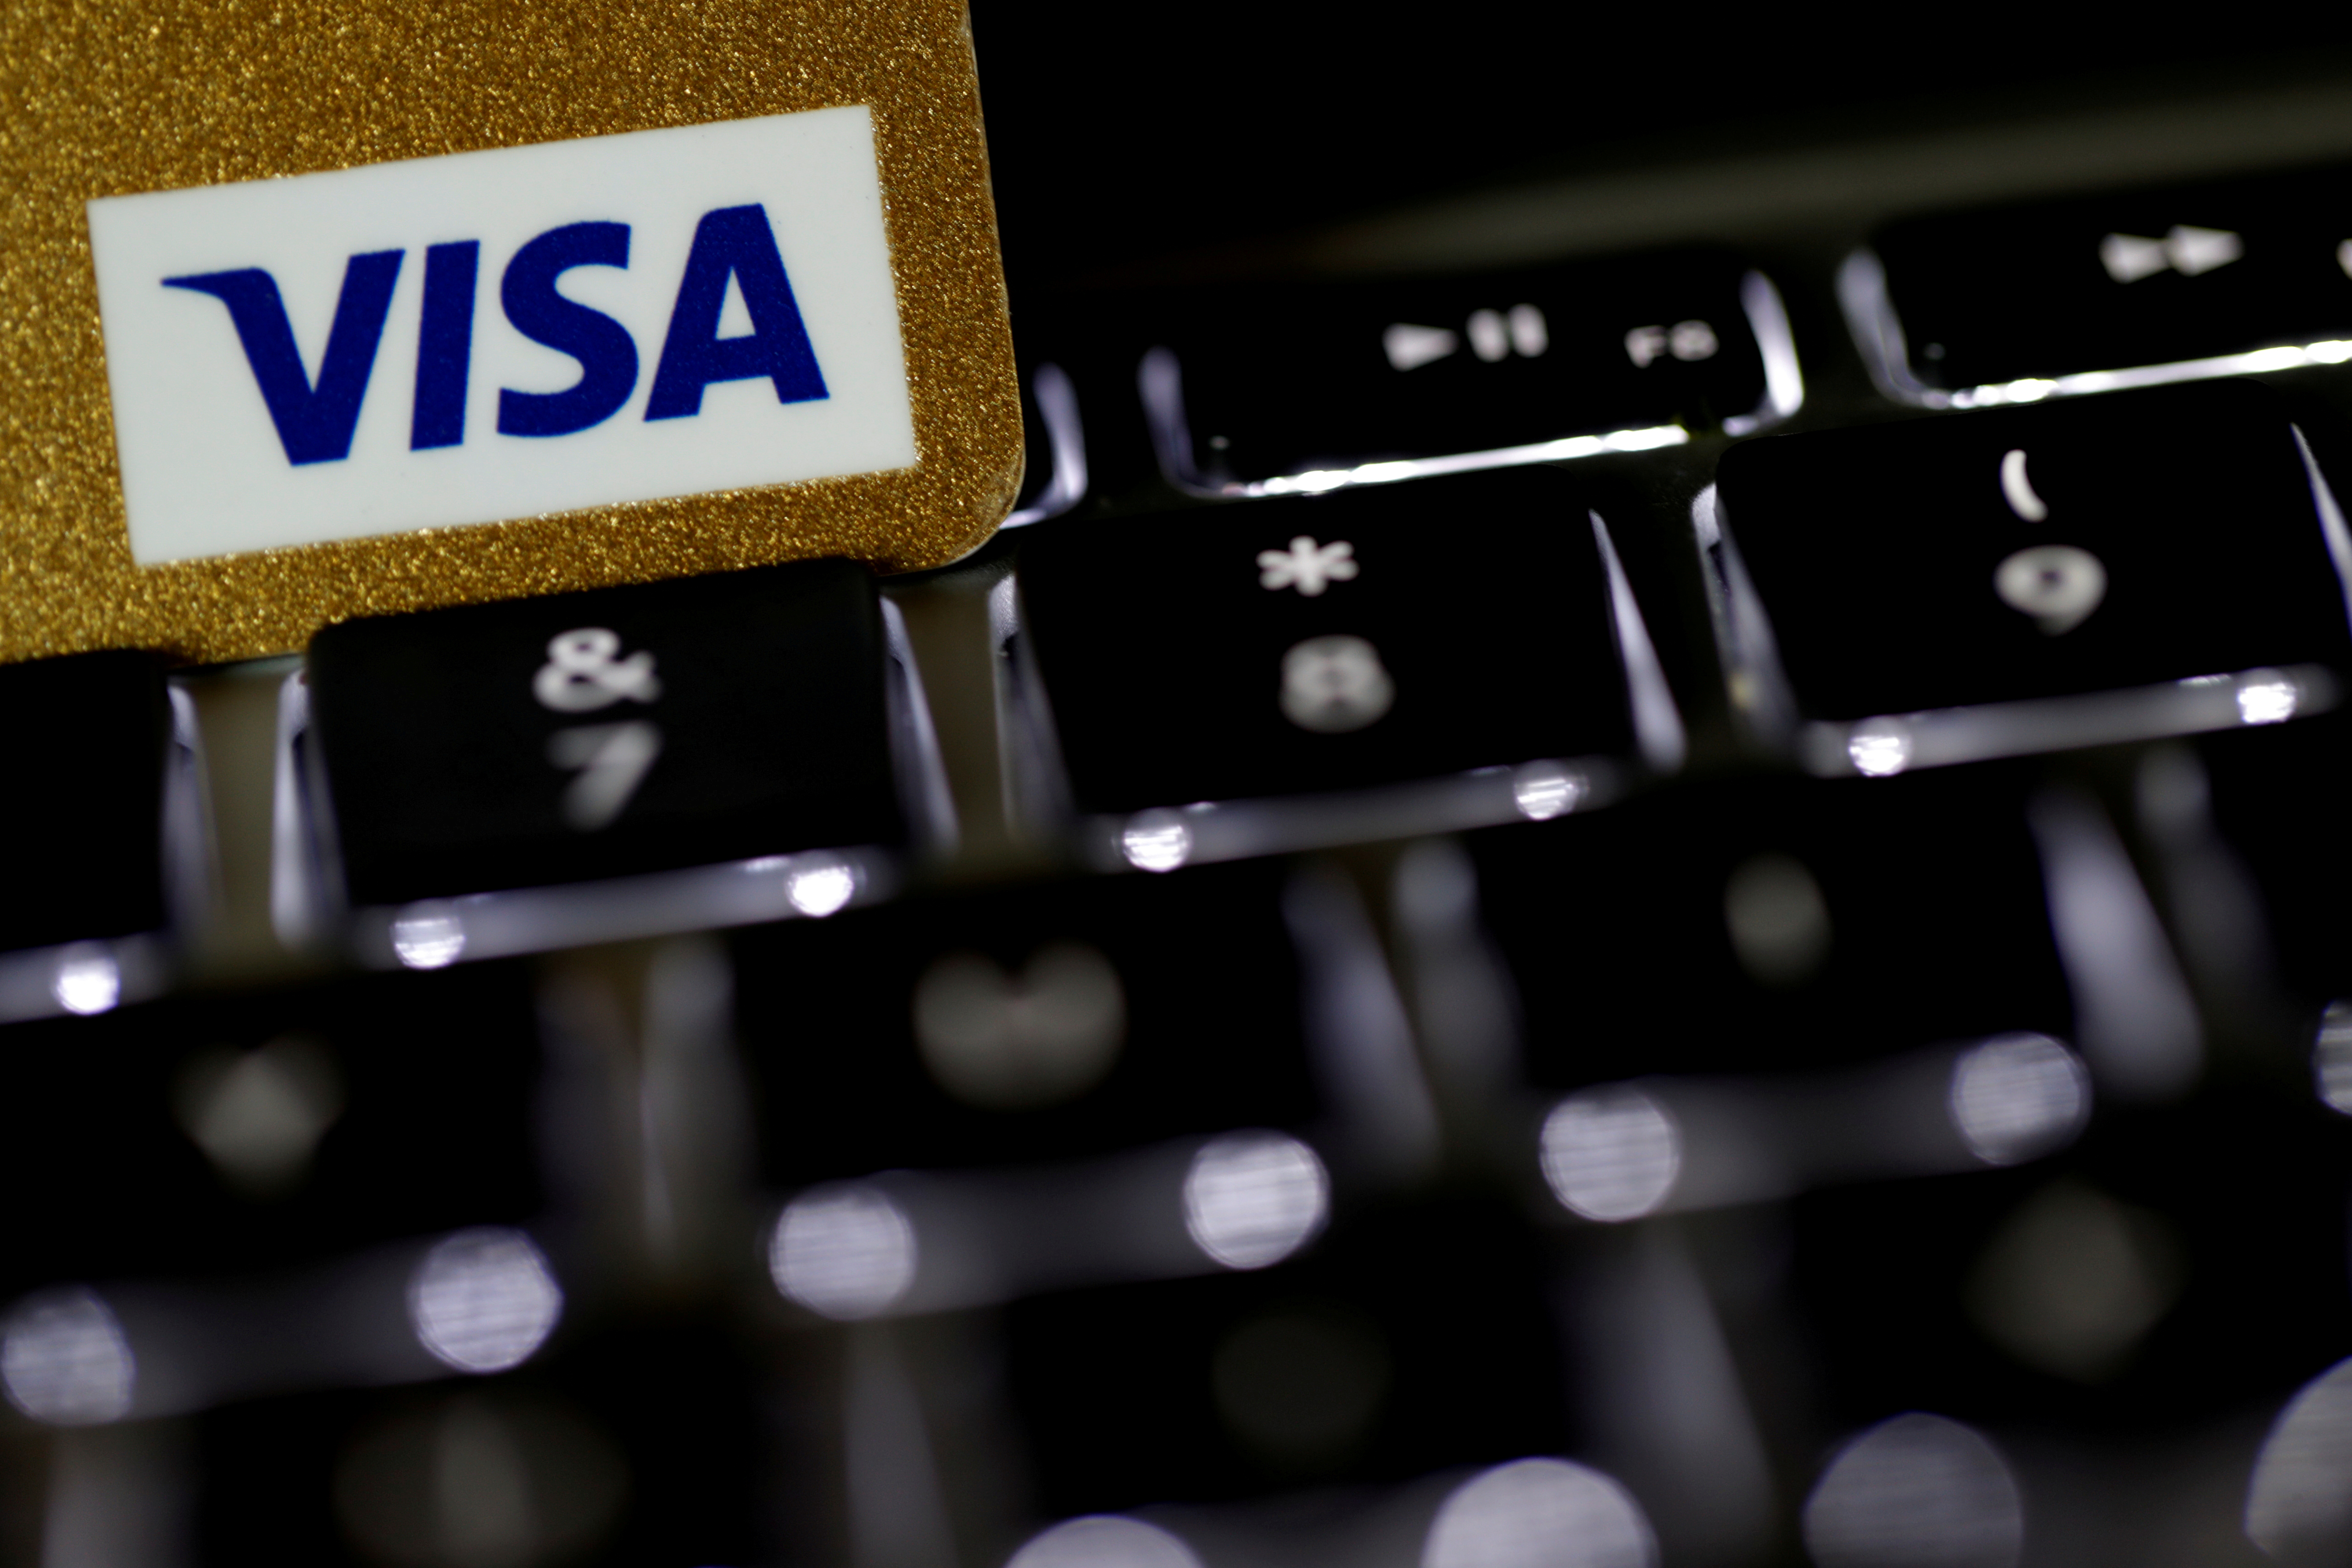 A Visa credit card is seen on a computer keyboard in this picture illustration